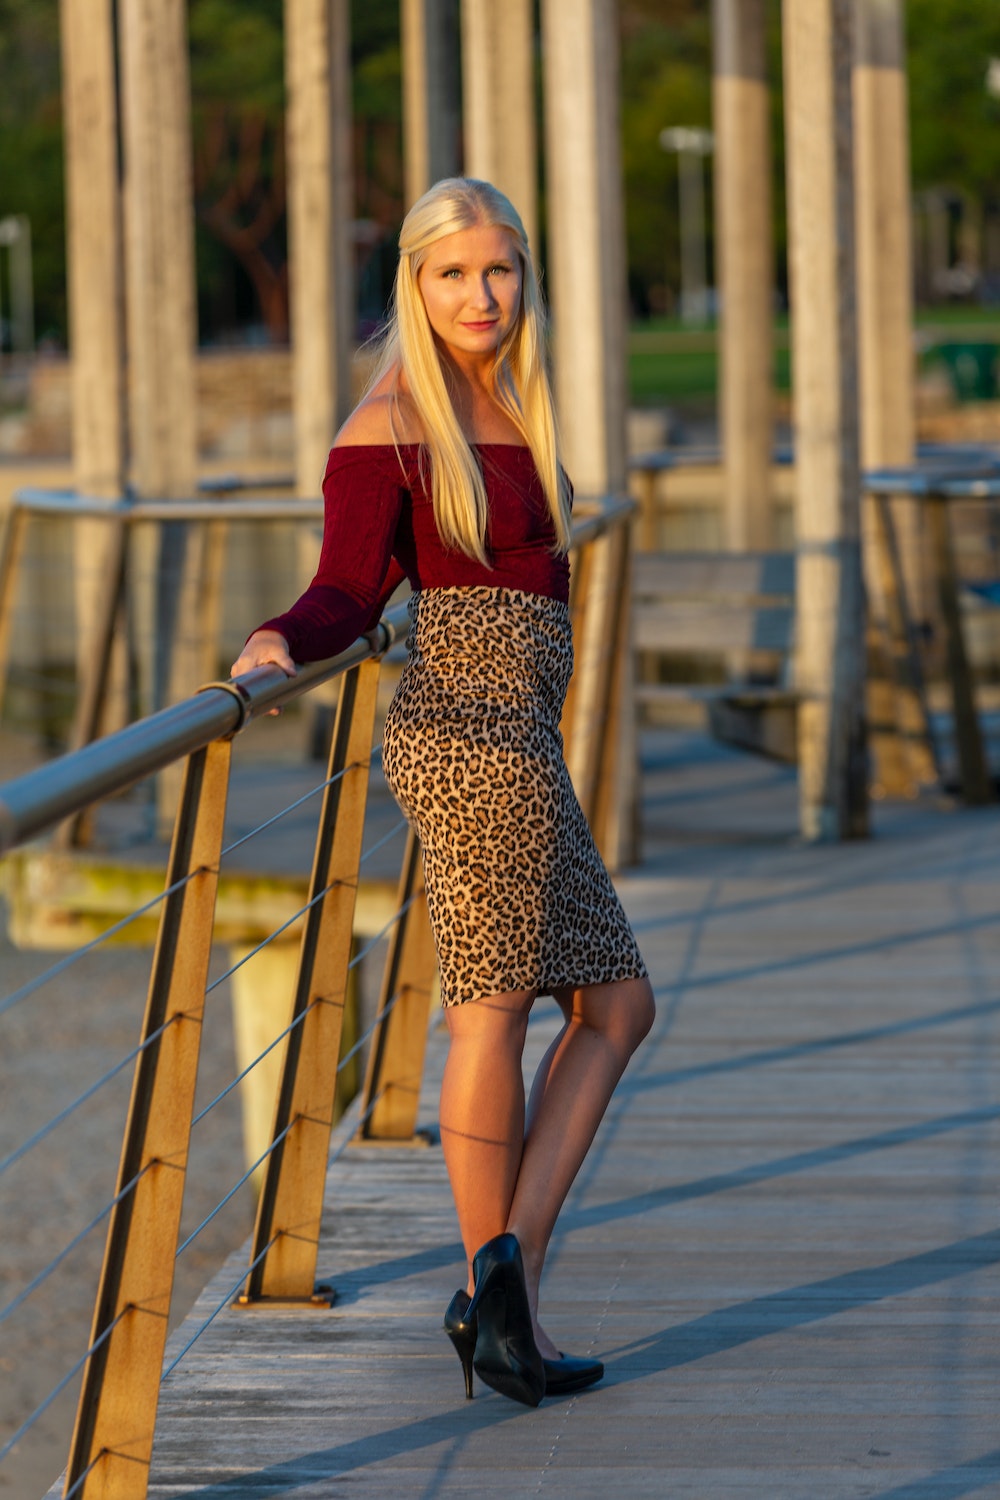 Tinder date outfits pencil skirt